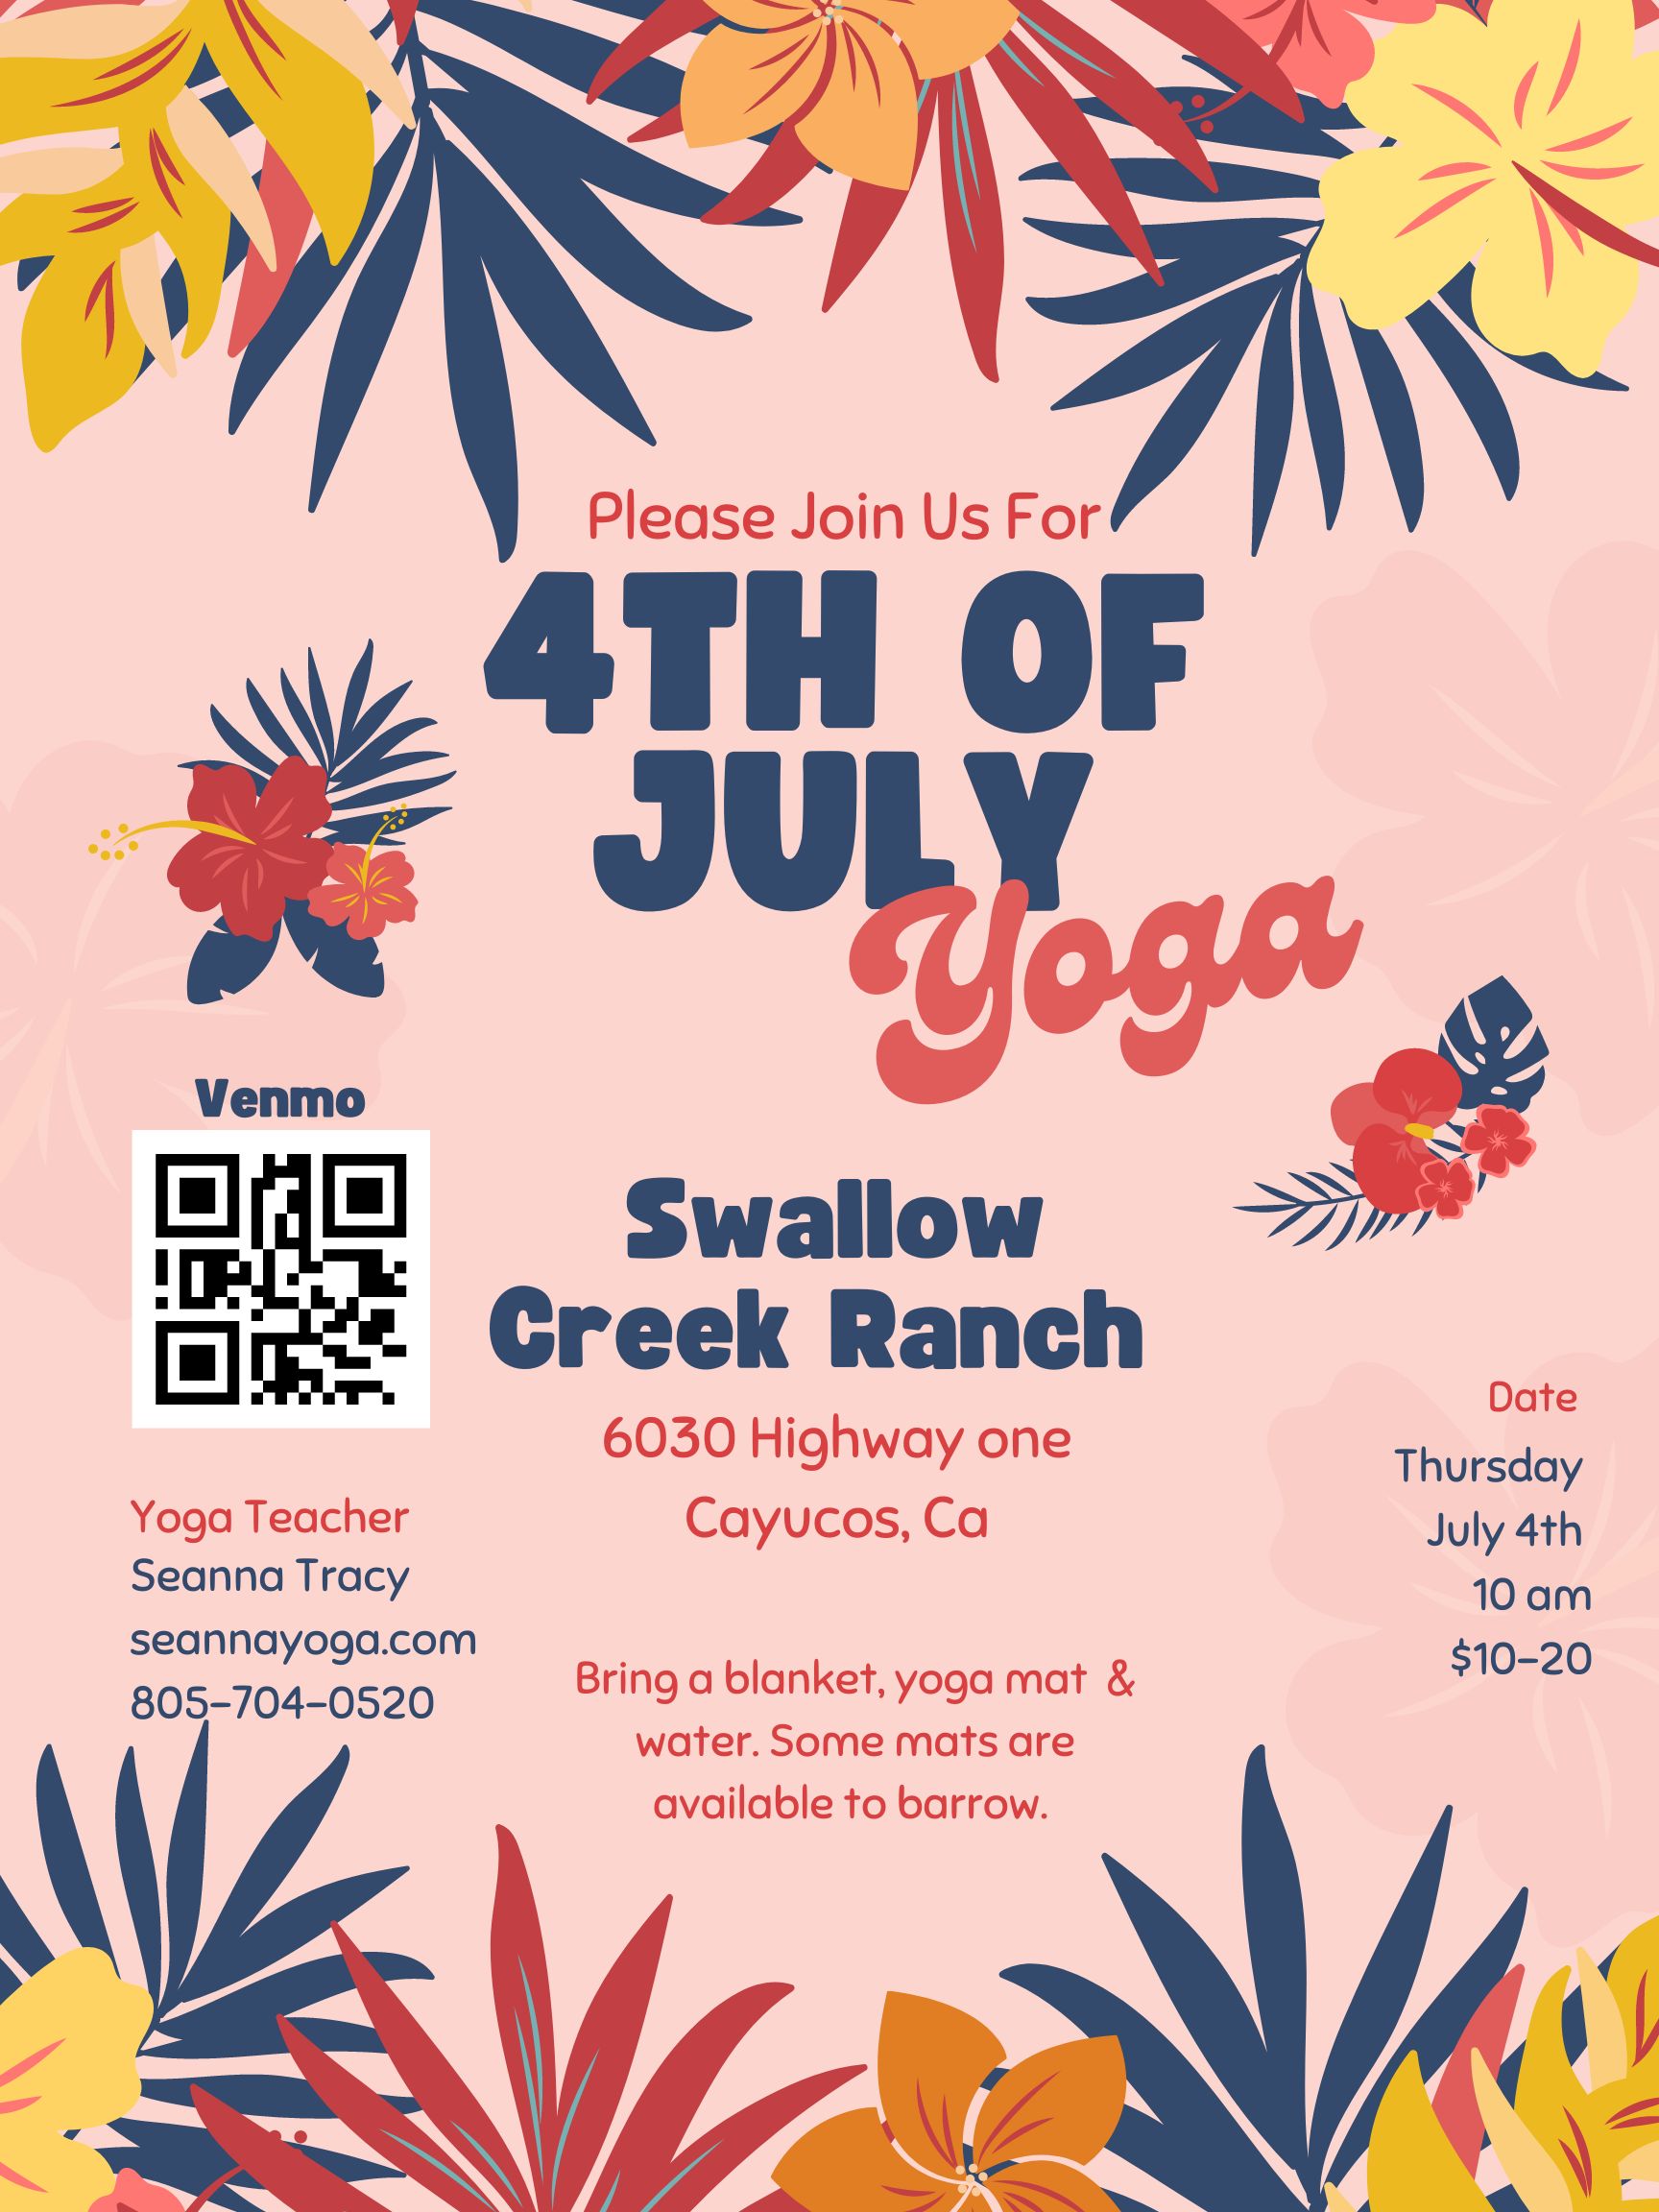 Special Event - 4th of July Yoga at the Ranch - 10am